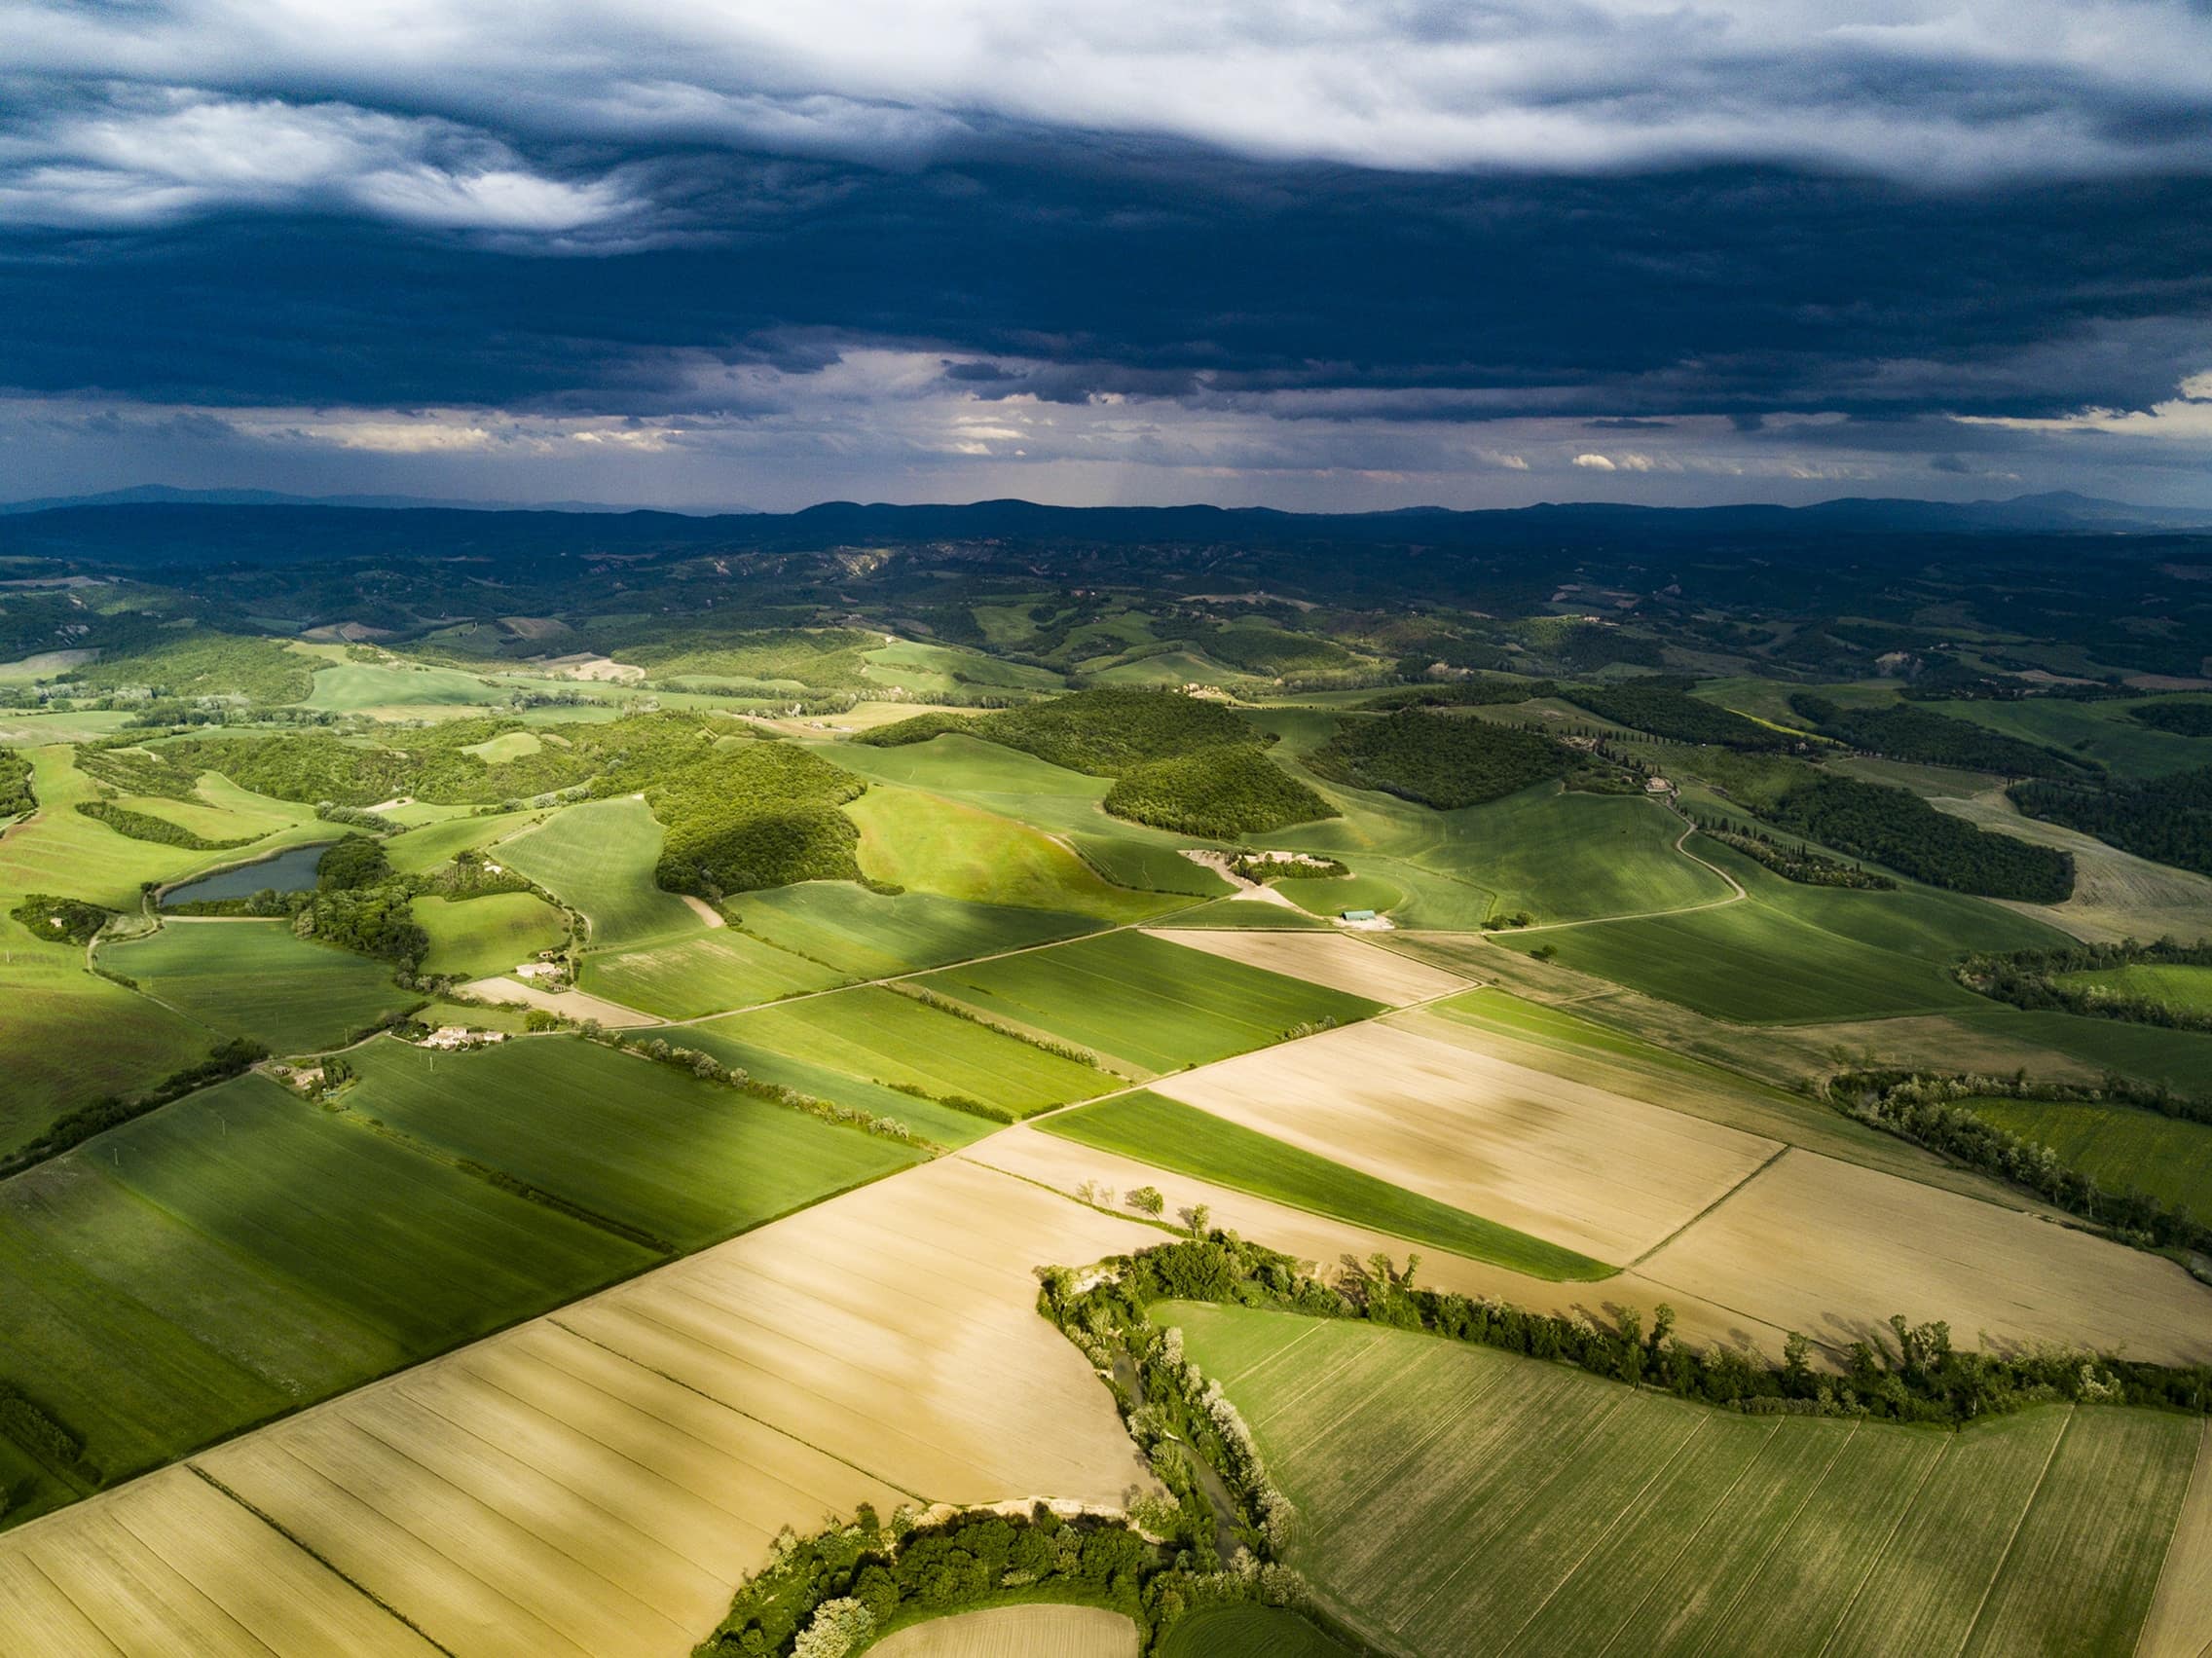 Stock image - Scenic view of the countryside in Toscana, Italia - Photo by sandro mattei